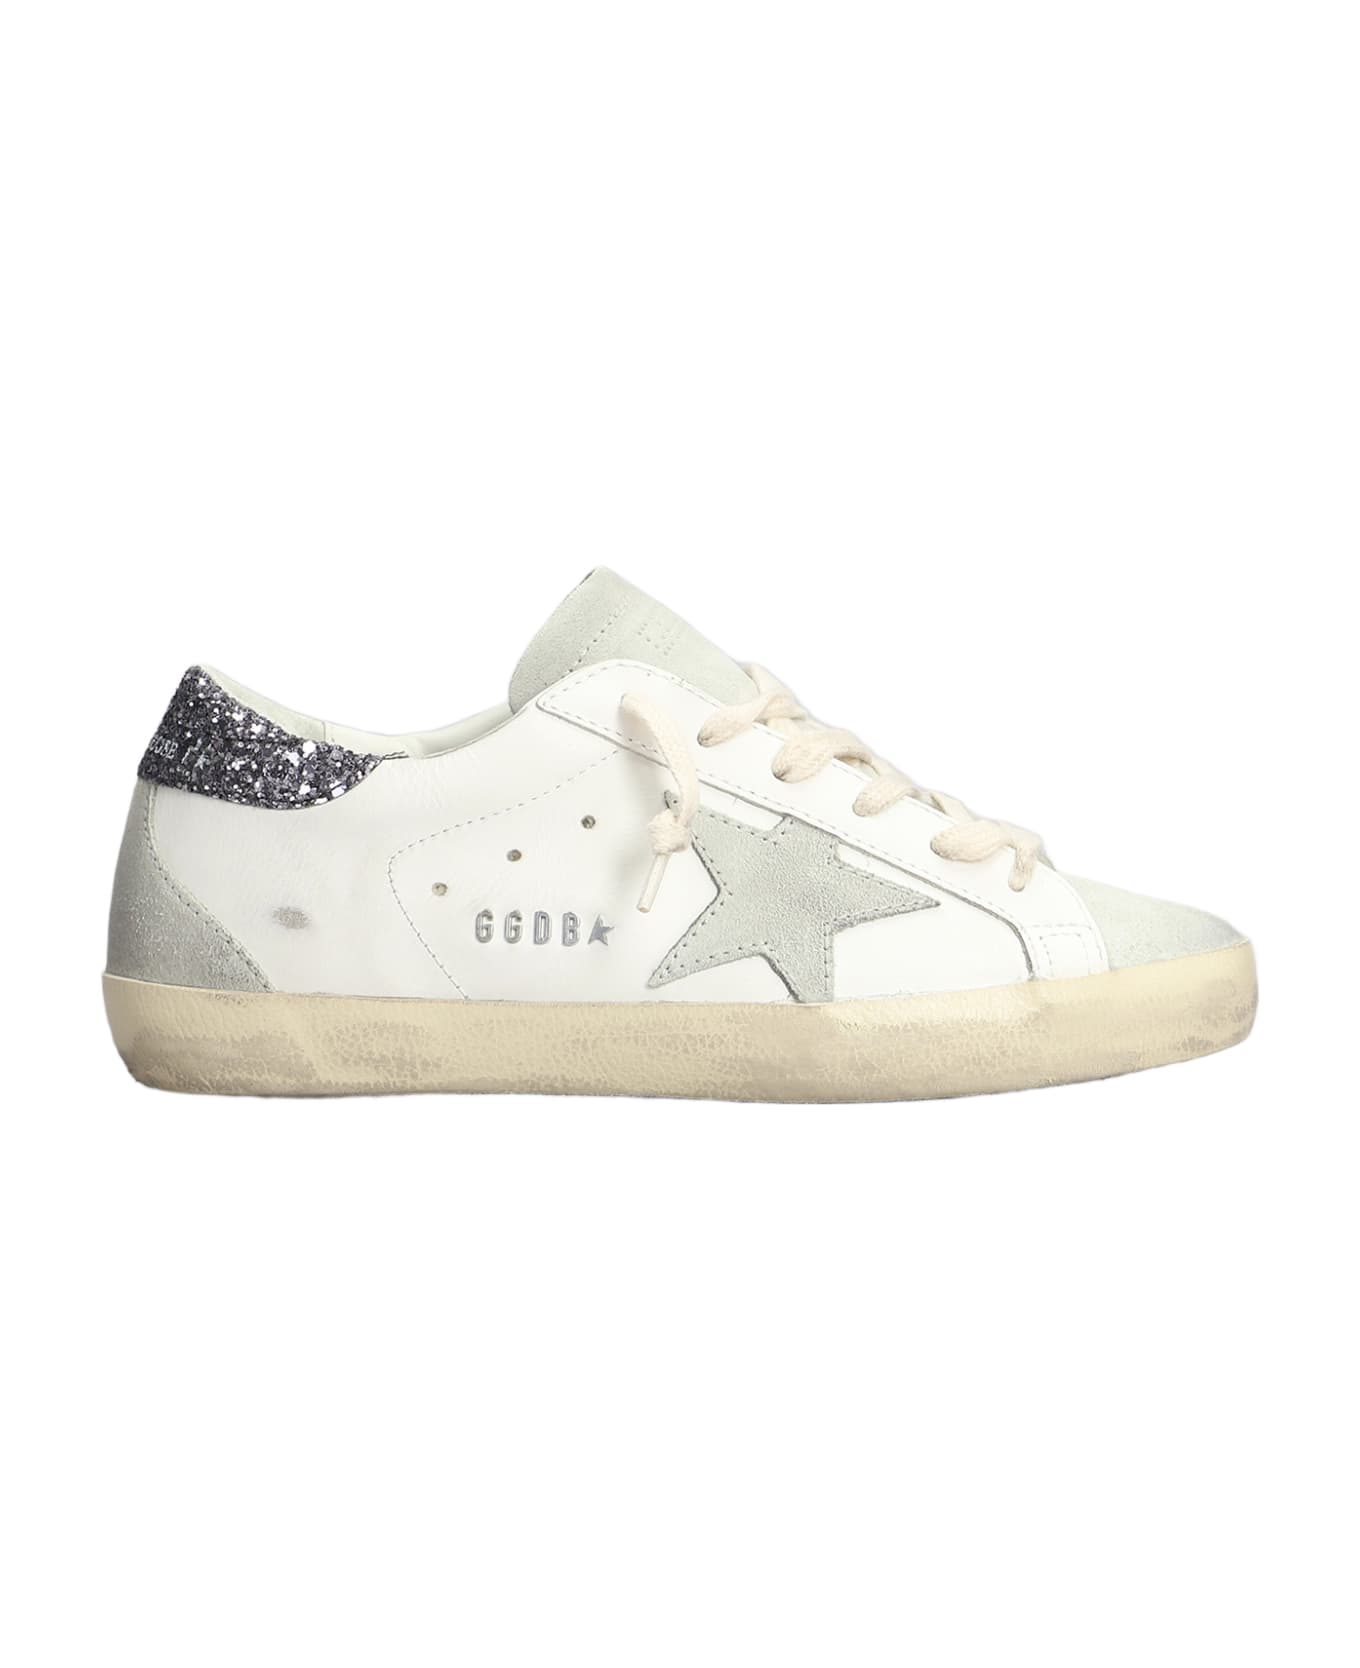 Golden Goose Superstar Sneakers In White Suede And Leather - white